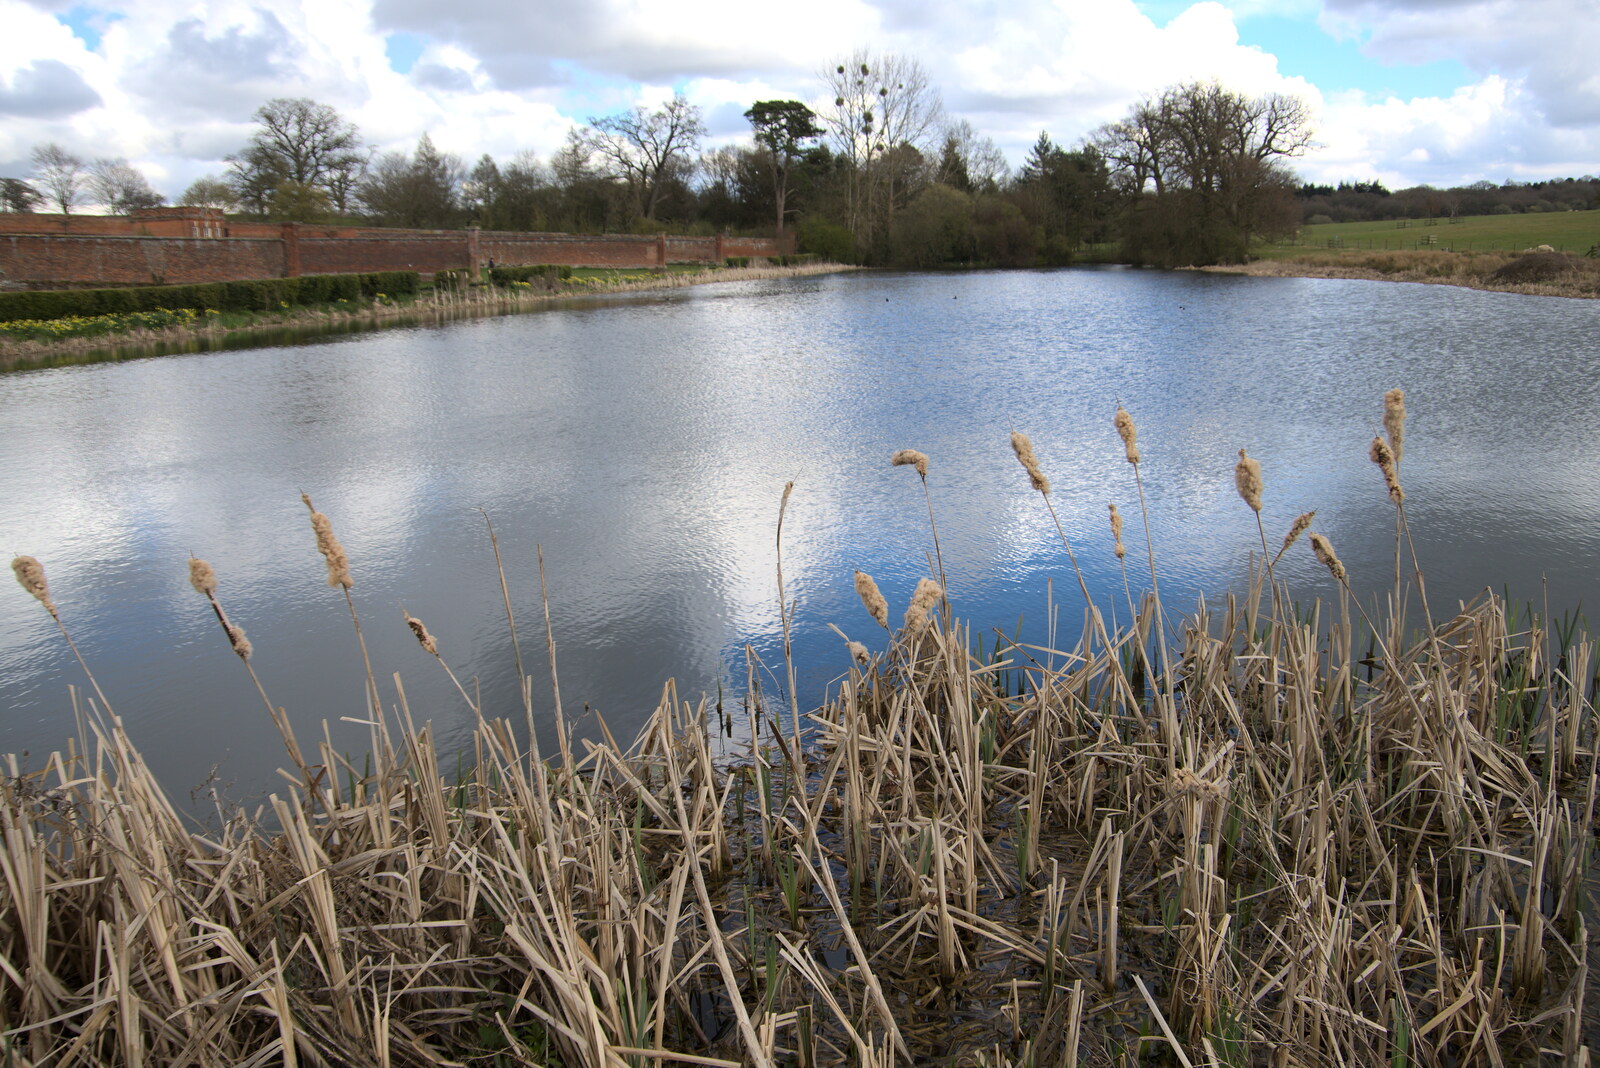 The articifial lake from A Return to Ickworth House, Horringer, Suffolk - 11th April 2021